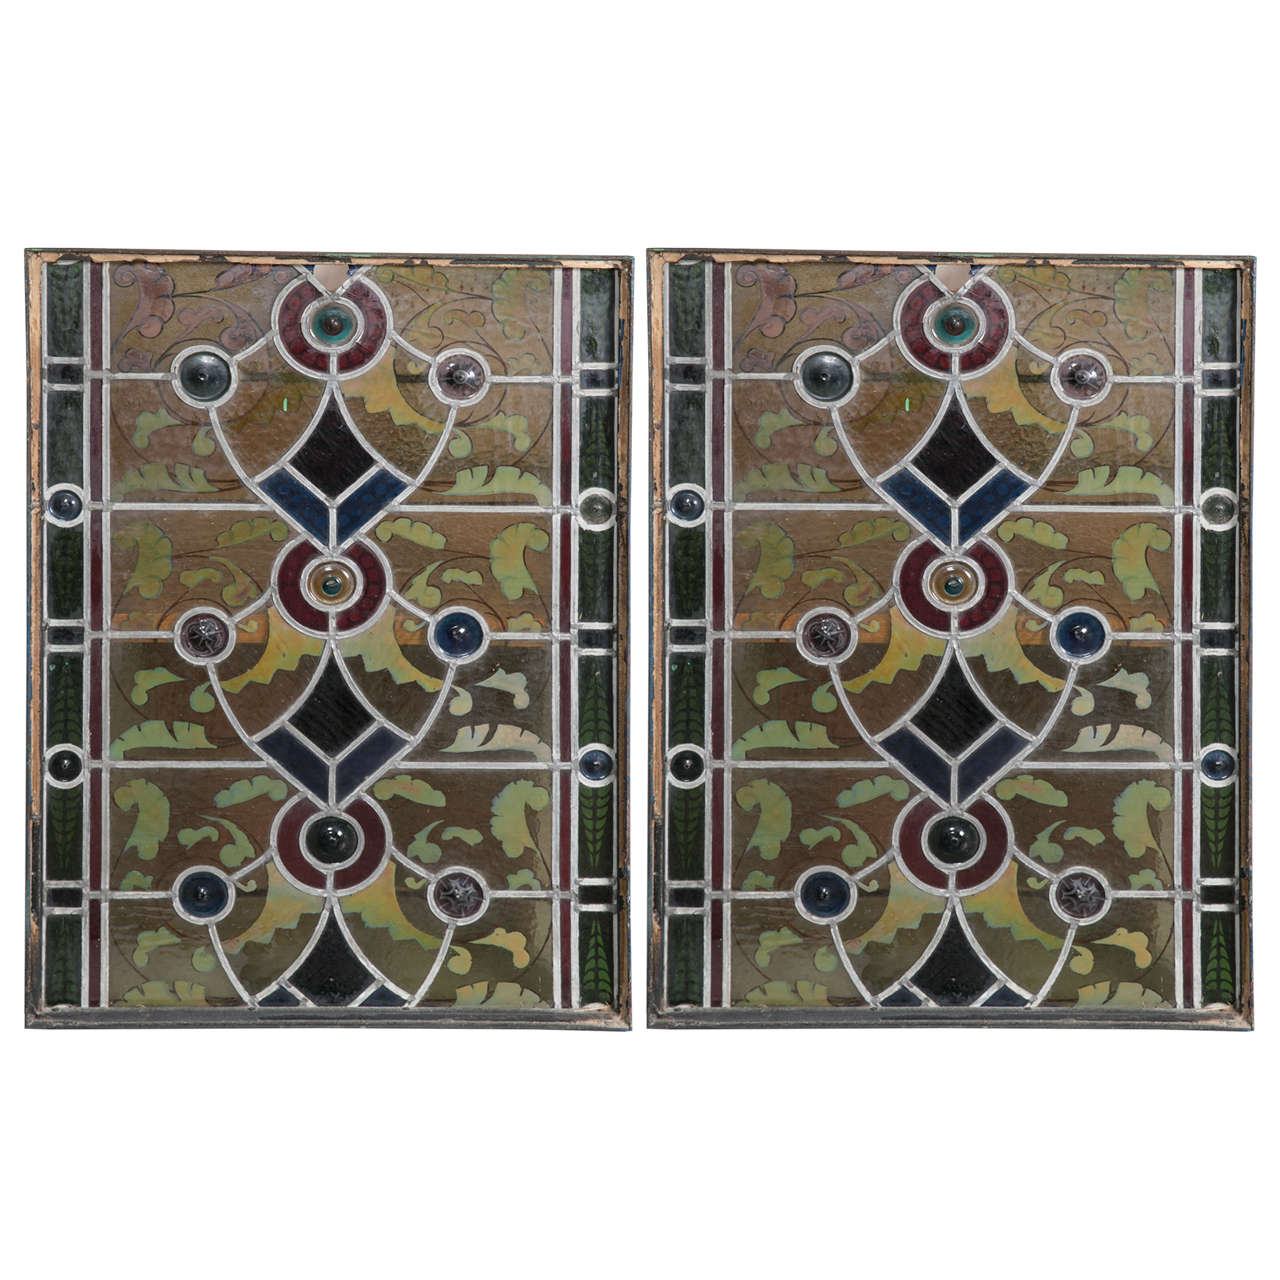 Early 19th Century German Stained Glass Window For Sale